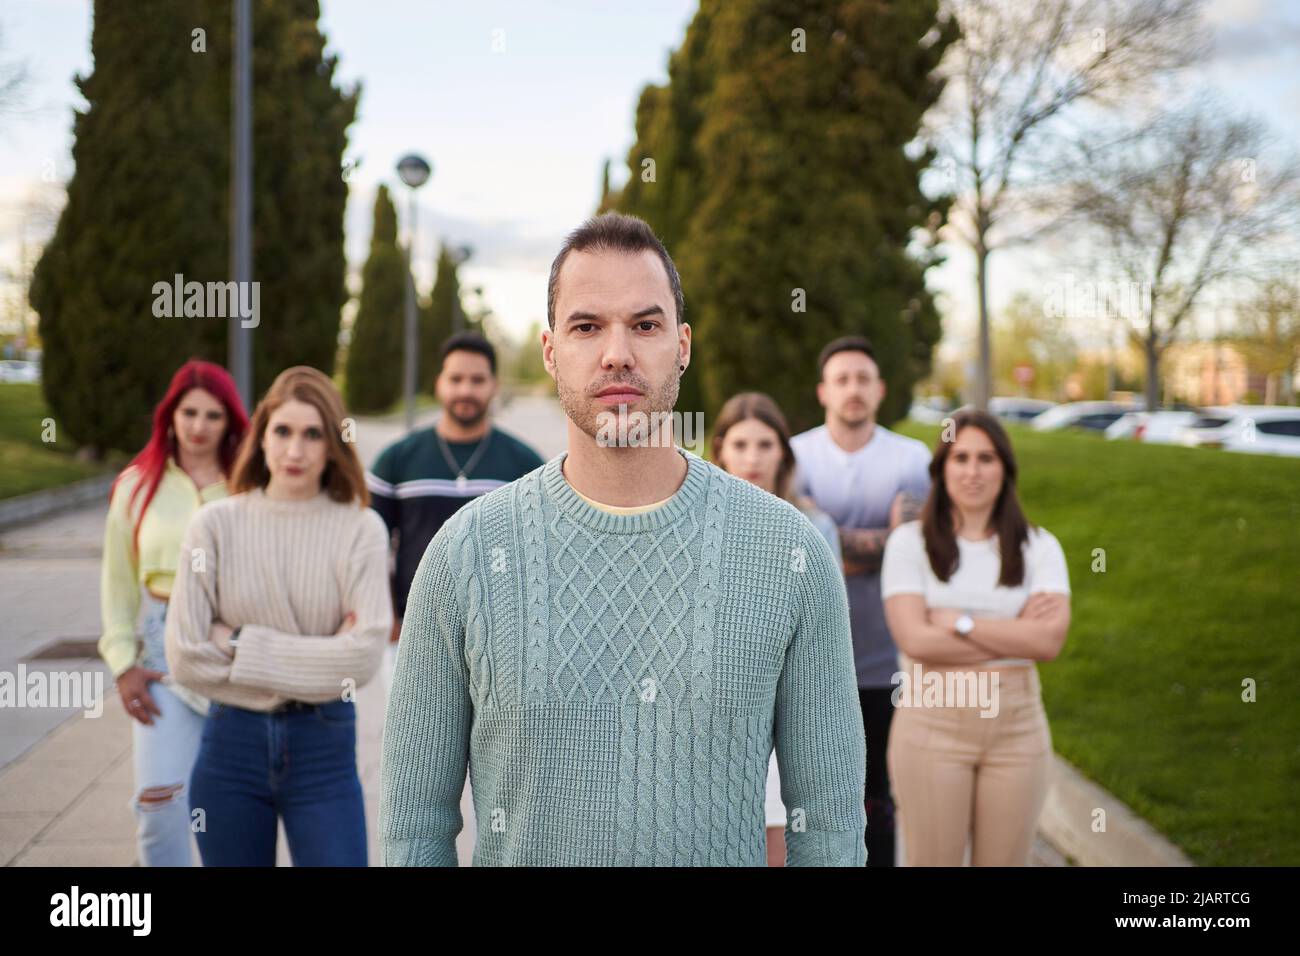 Man looking serious at the camera while standing in front of a group of people. Team and leadership concept. Stock Photo